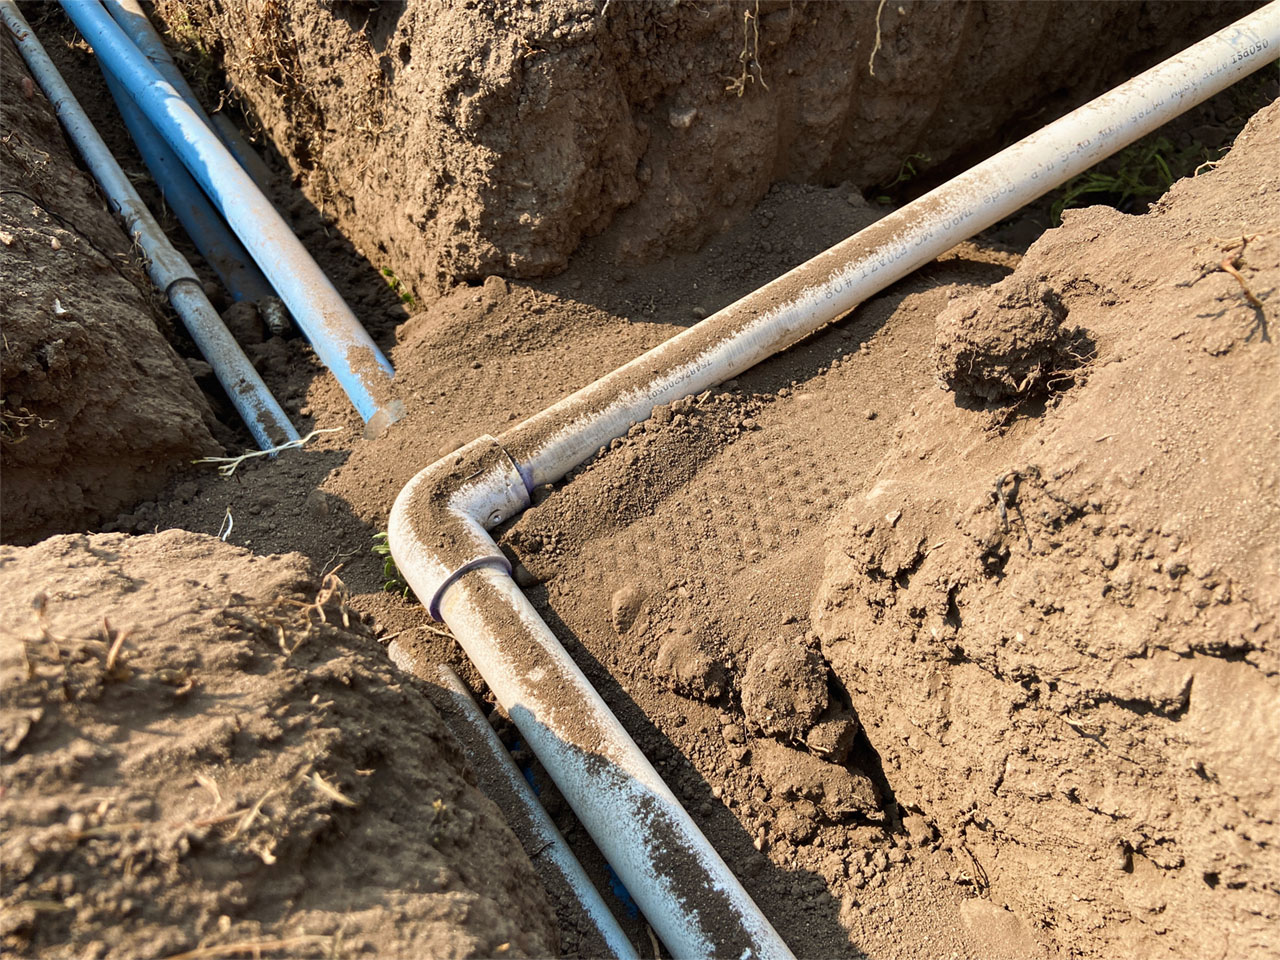 PVC electrical conduits buried in the earth